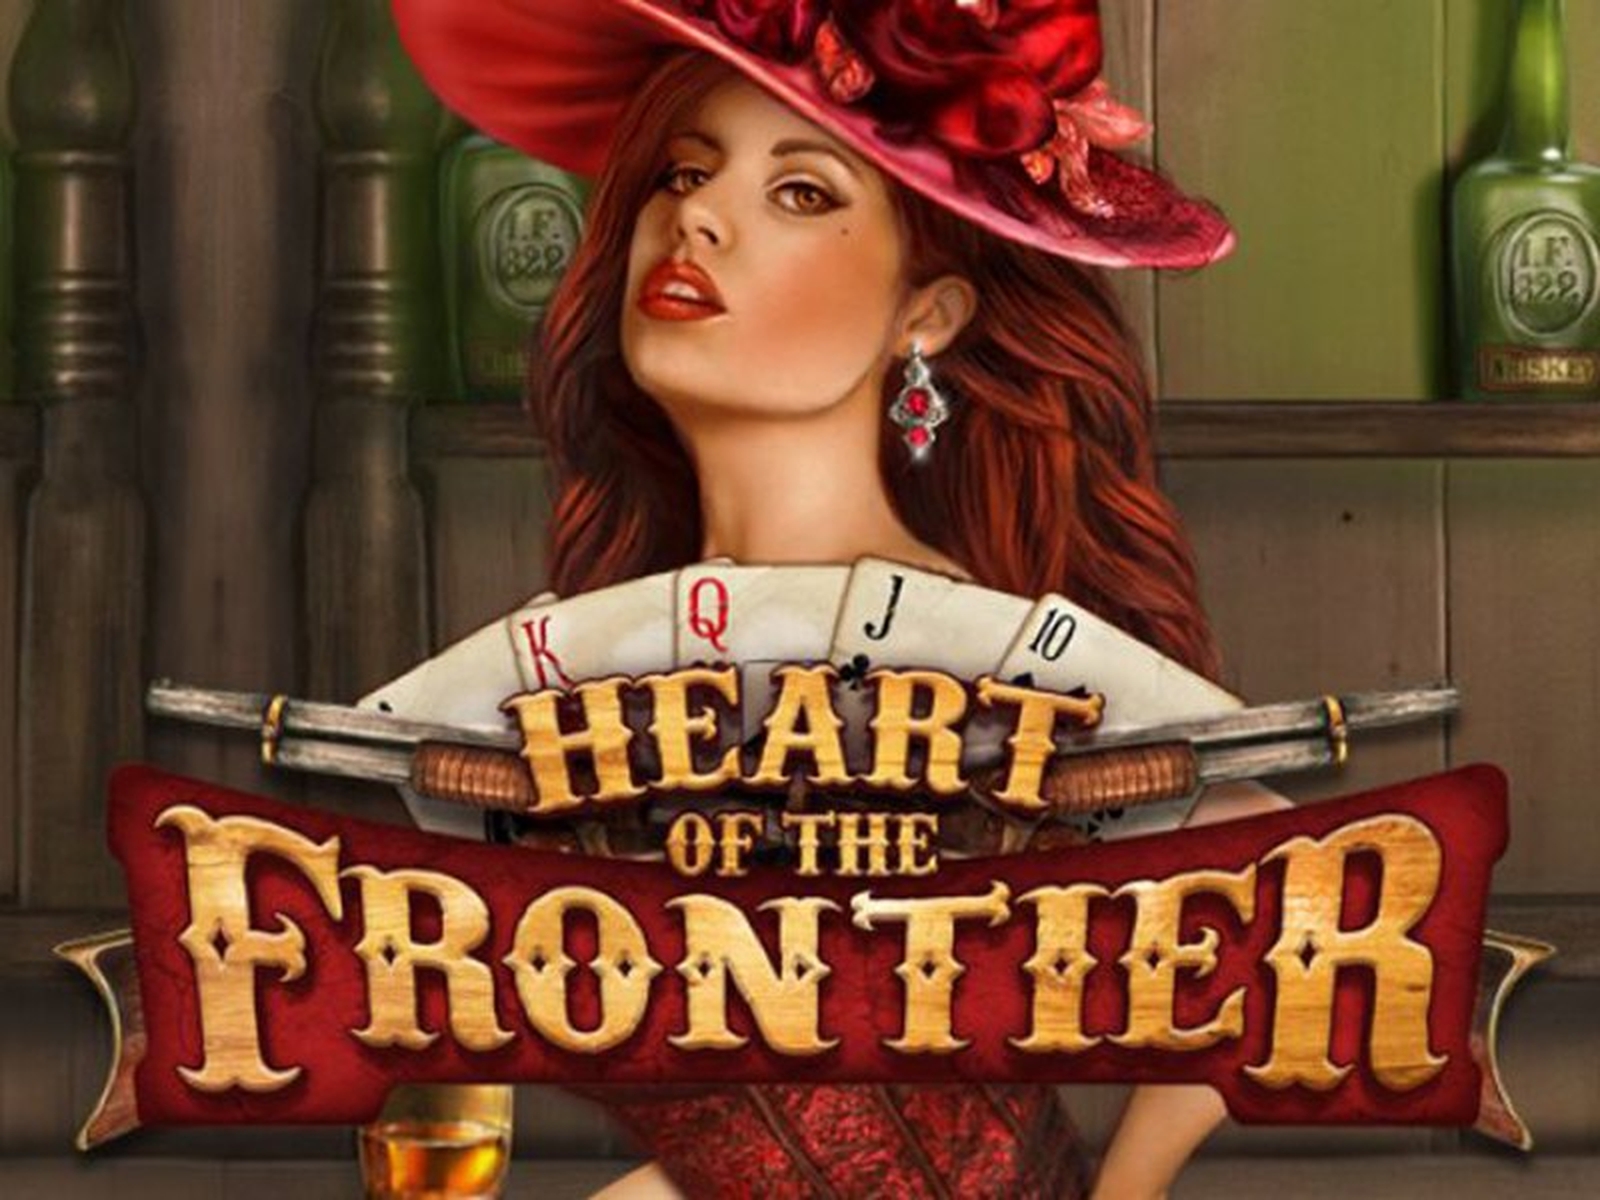 The Heart of the Frontier Online Slot Demo Game by Playtech